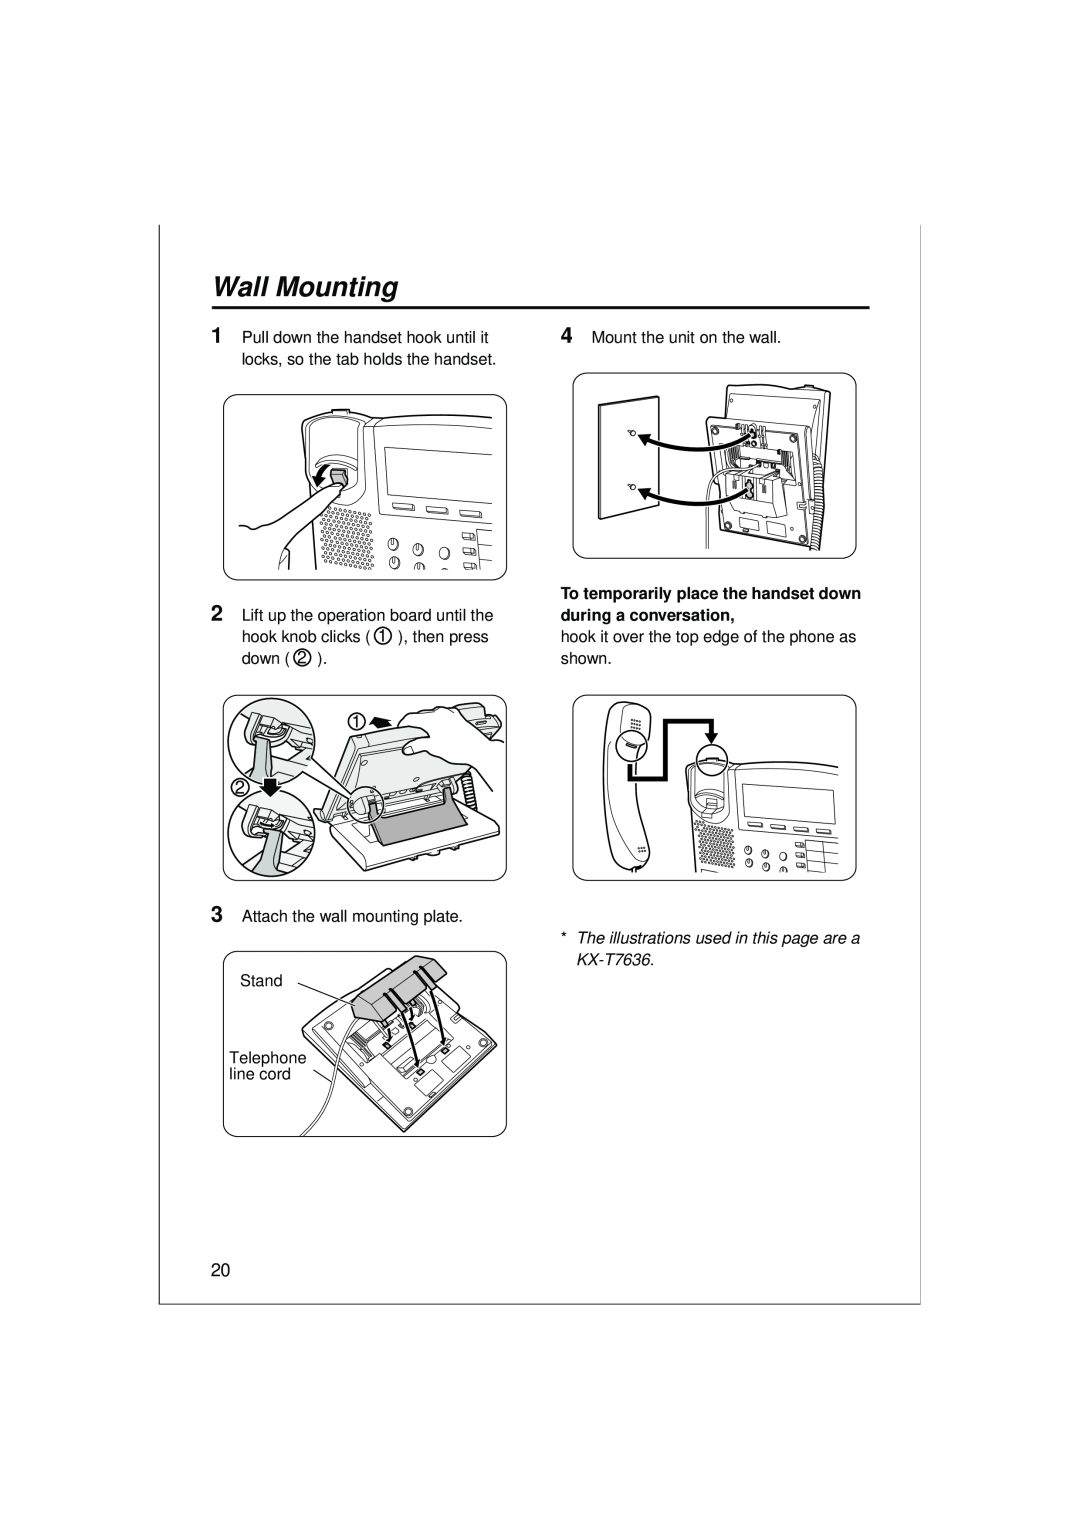 Panasonic Wall Mounting, The illustrations used in this page are a KX-T7636, To temporarily place the handset down 